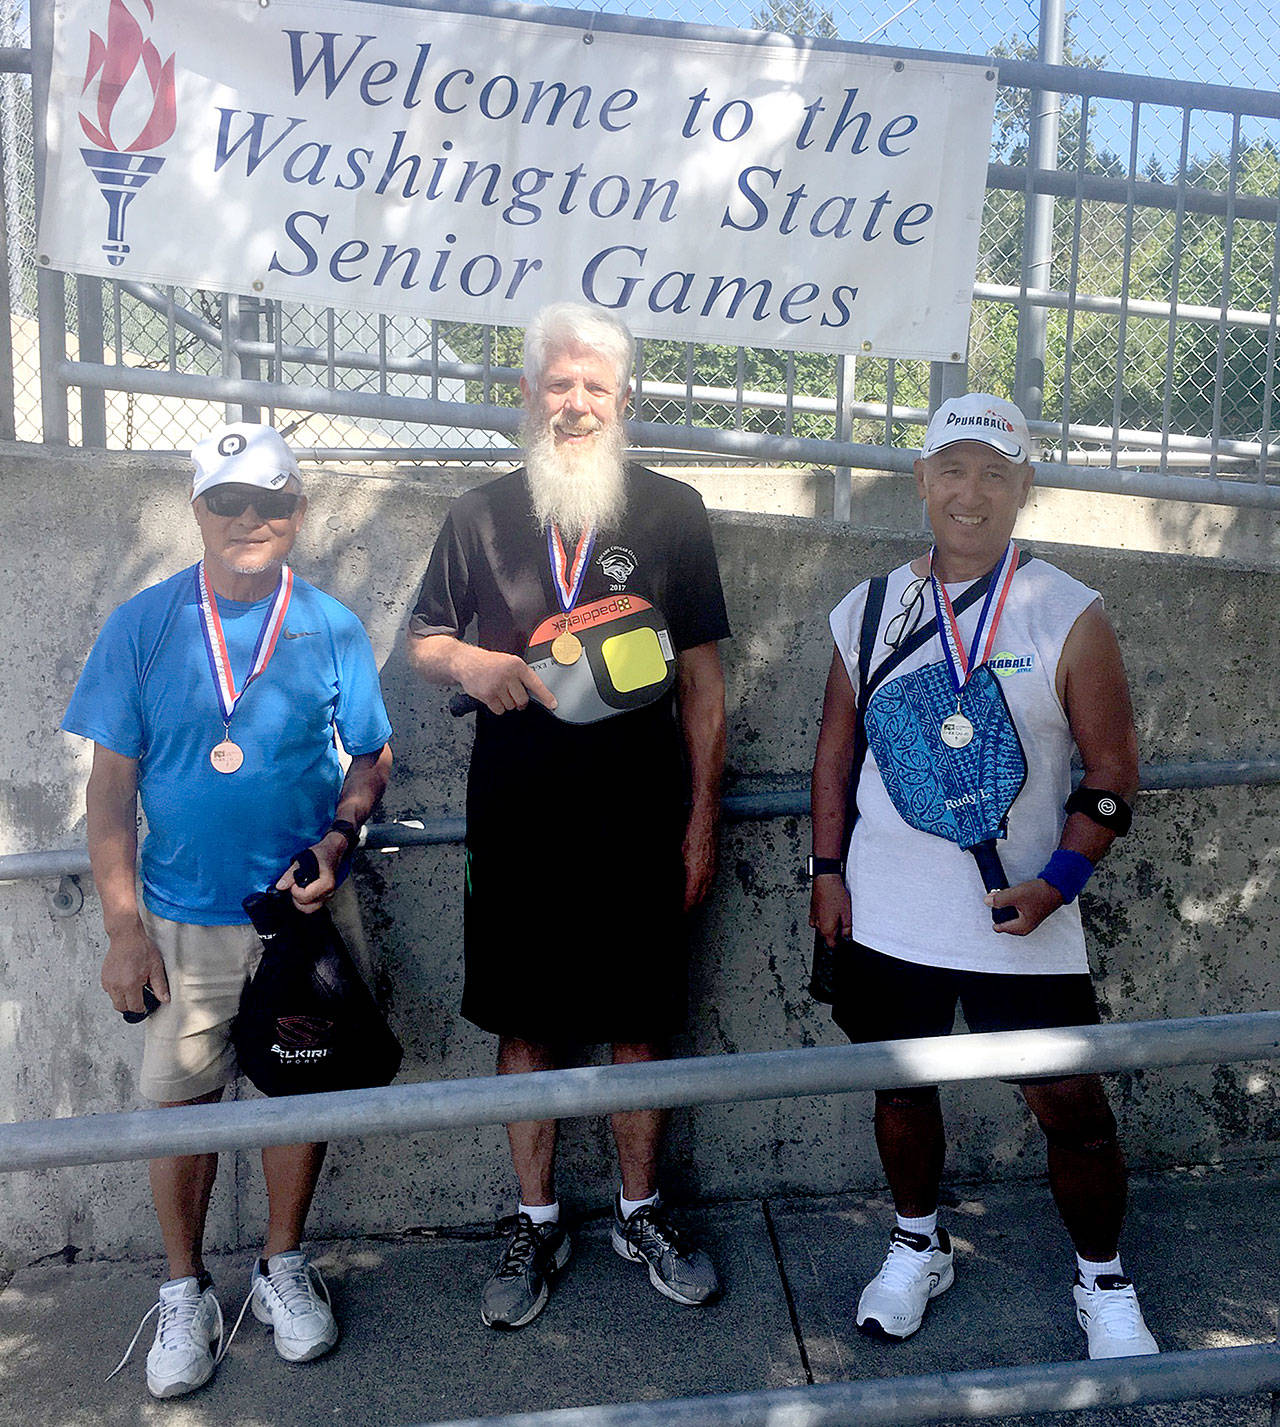 The 70-plus 3.5 singles’ winners in the Pickleball competiton at the Washington Senior Games held on July 21-23. From left, are Yim Lee of Seattle (bronze), Steve Bennett of Port Angeles (gold) and Rudy Lopez of Hawaii (silver).